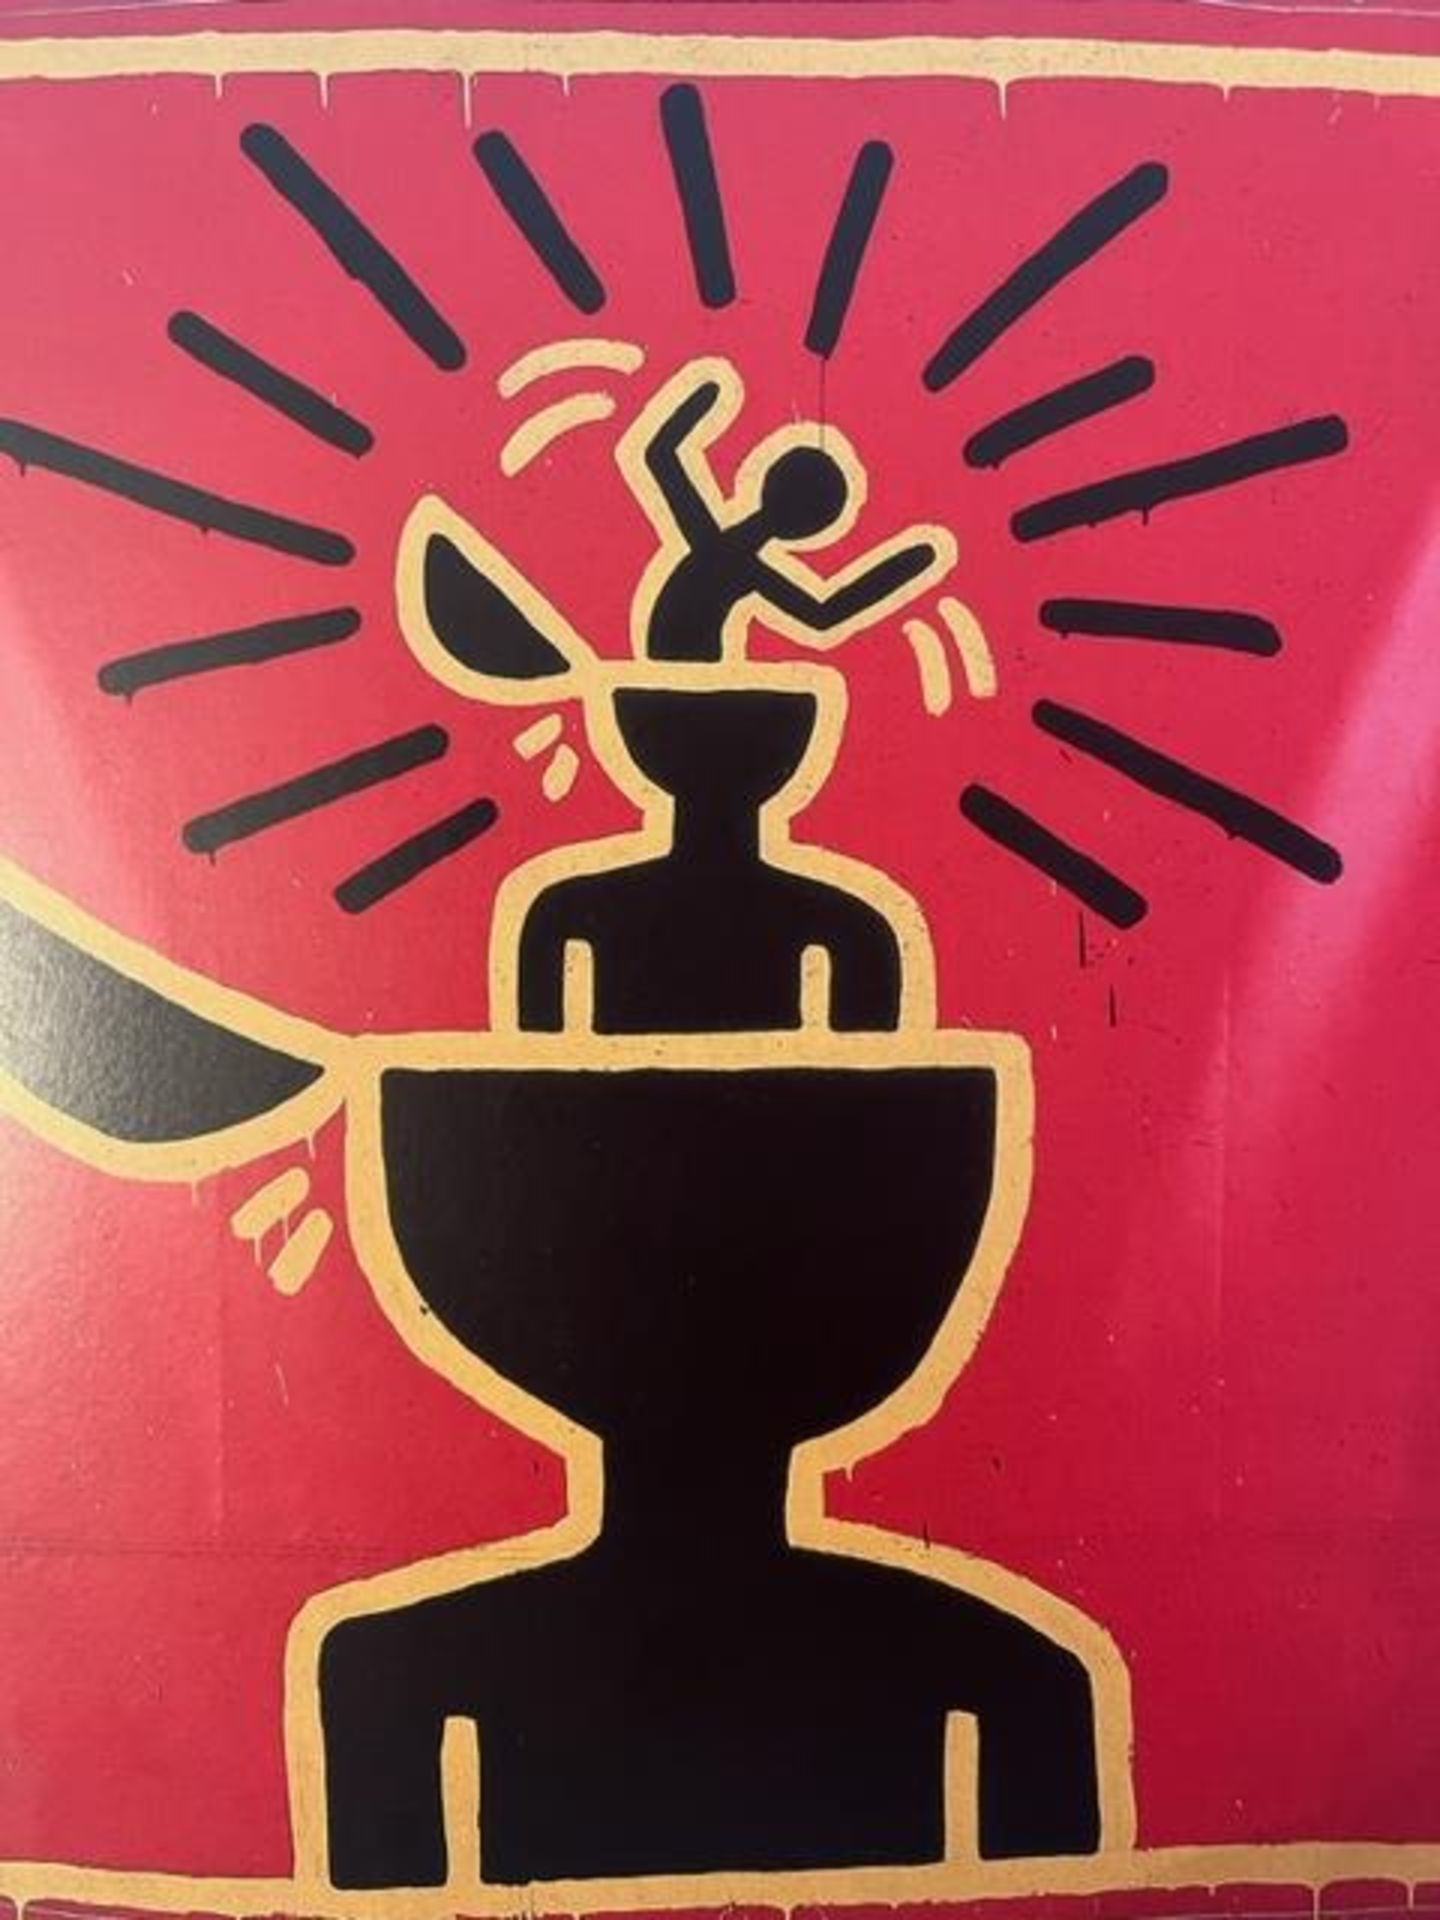 Keith Haring "Untitled" Print. - Image 2 of 10